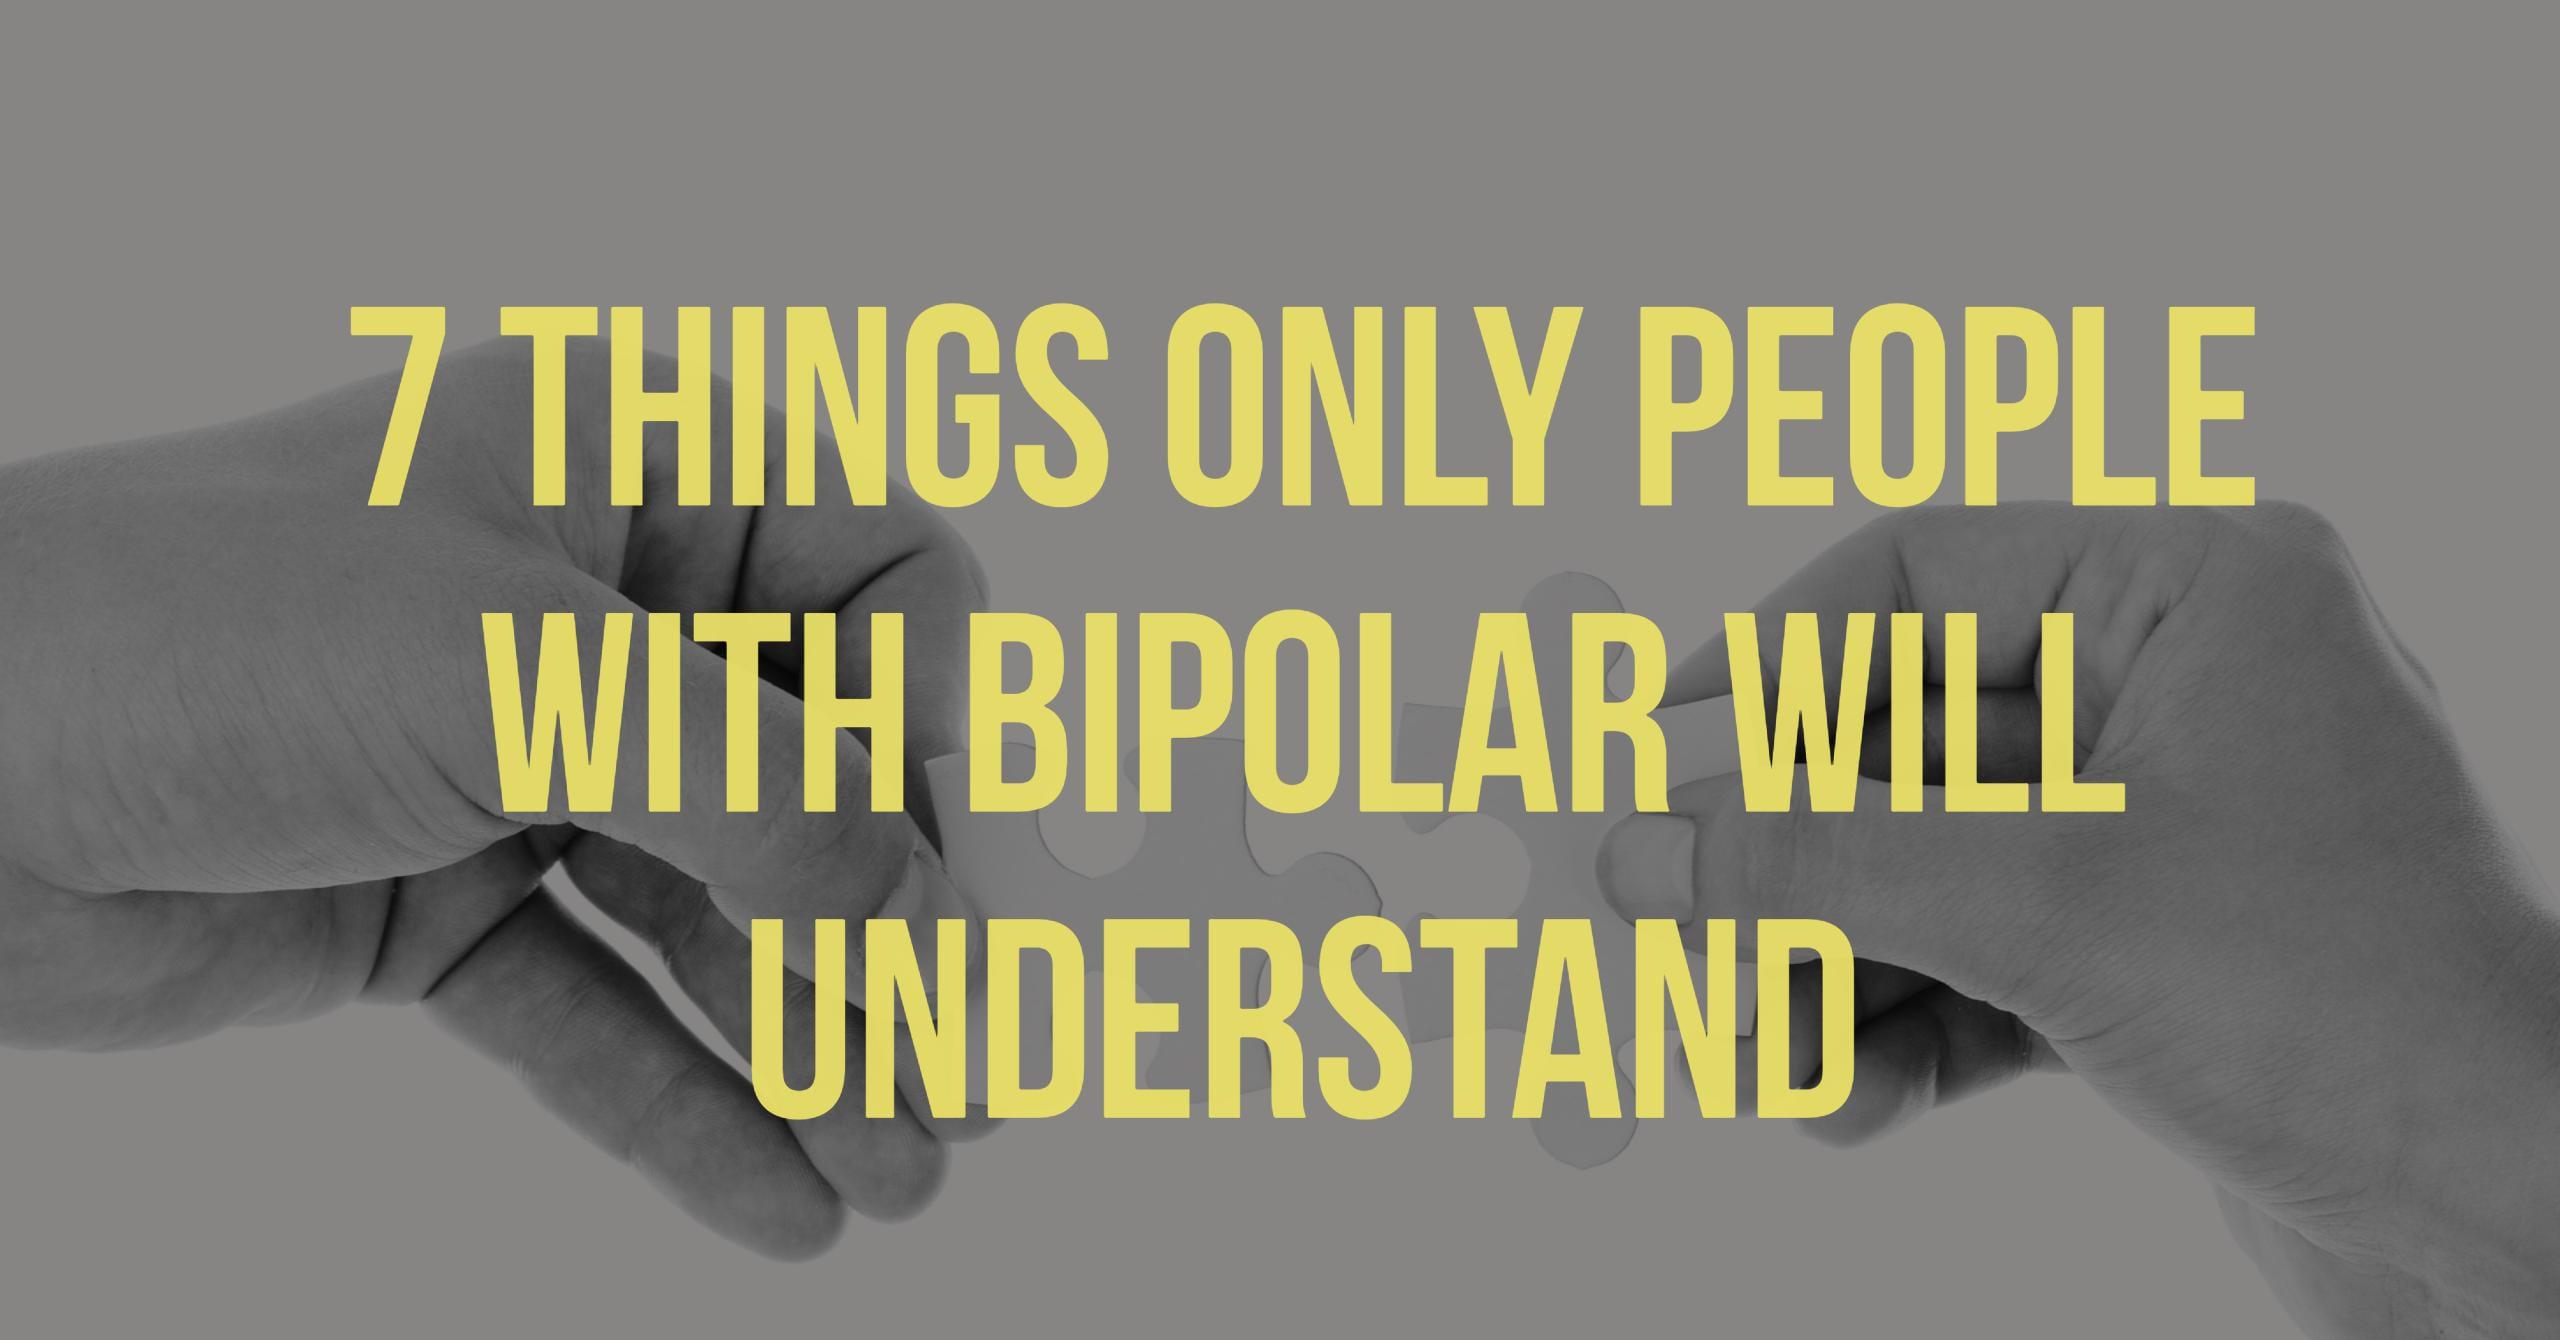 7 Things Only People With Bipolar Will Understand